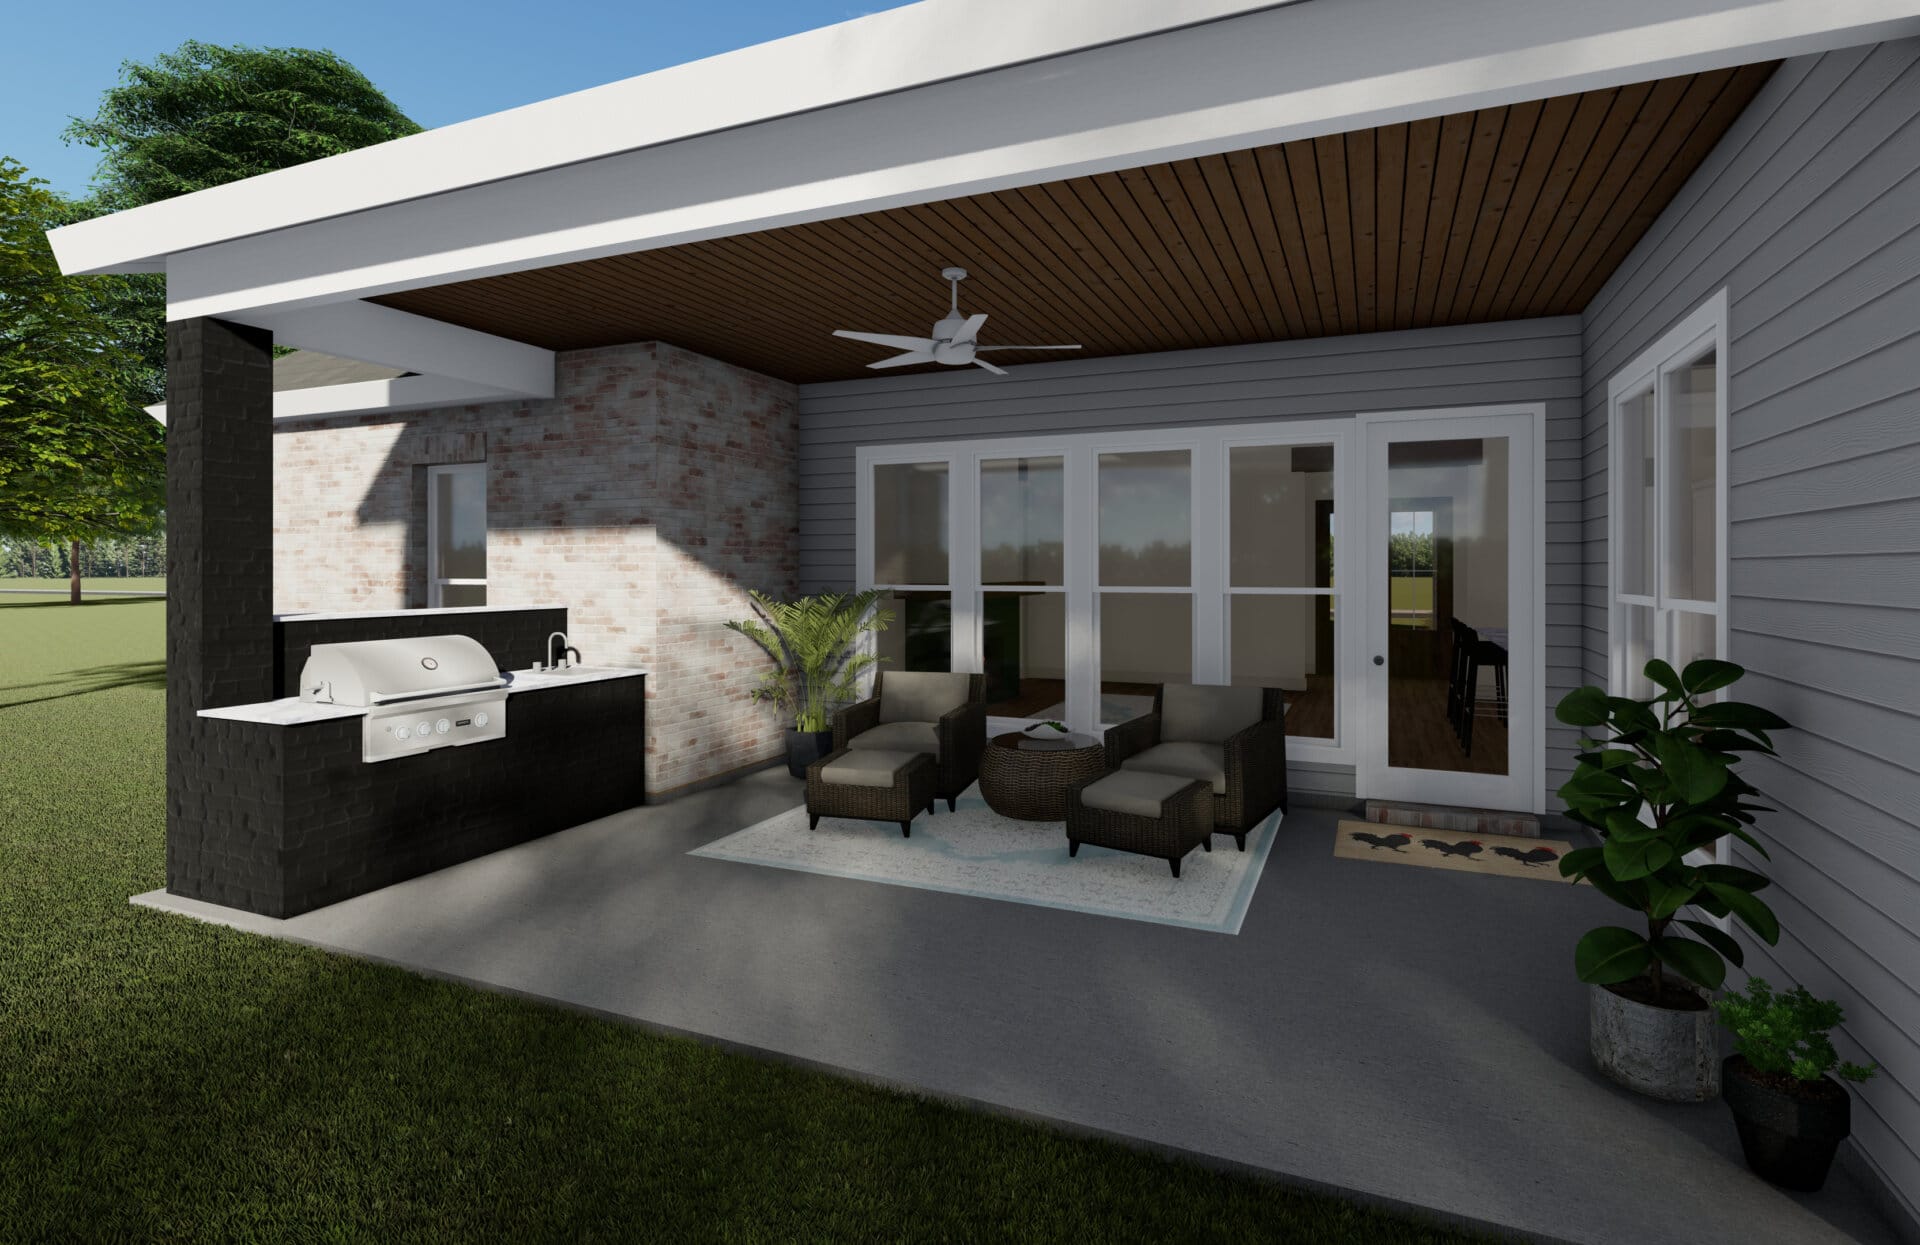 3D rendering of back porch with kitchen and outdoor seating